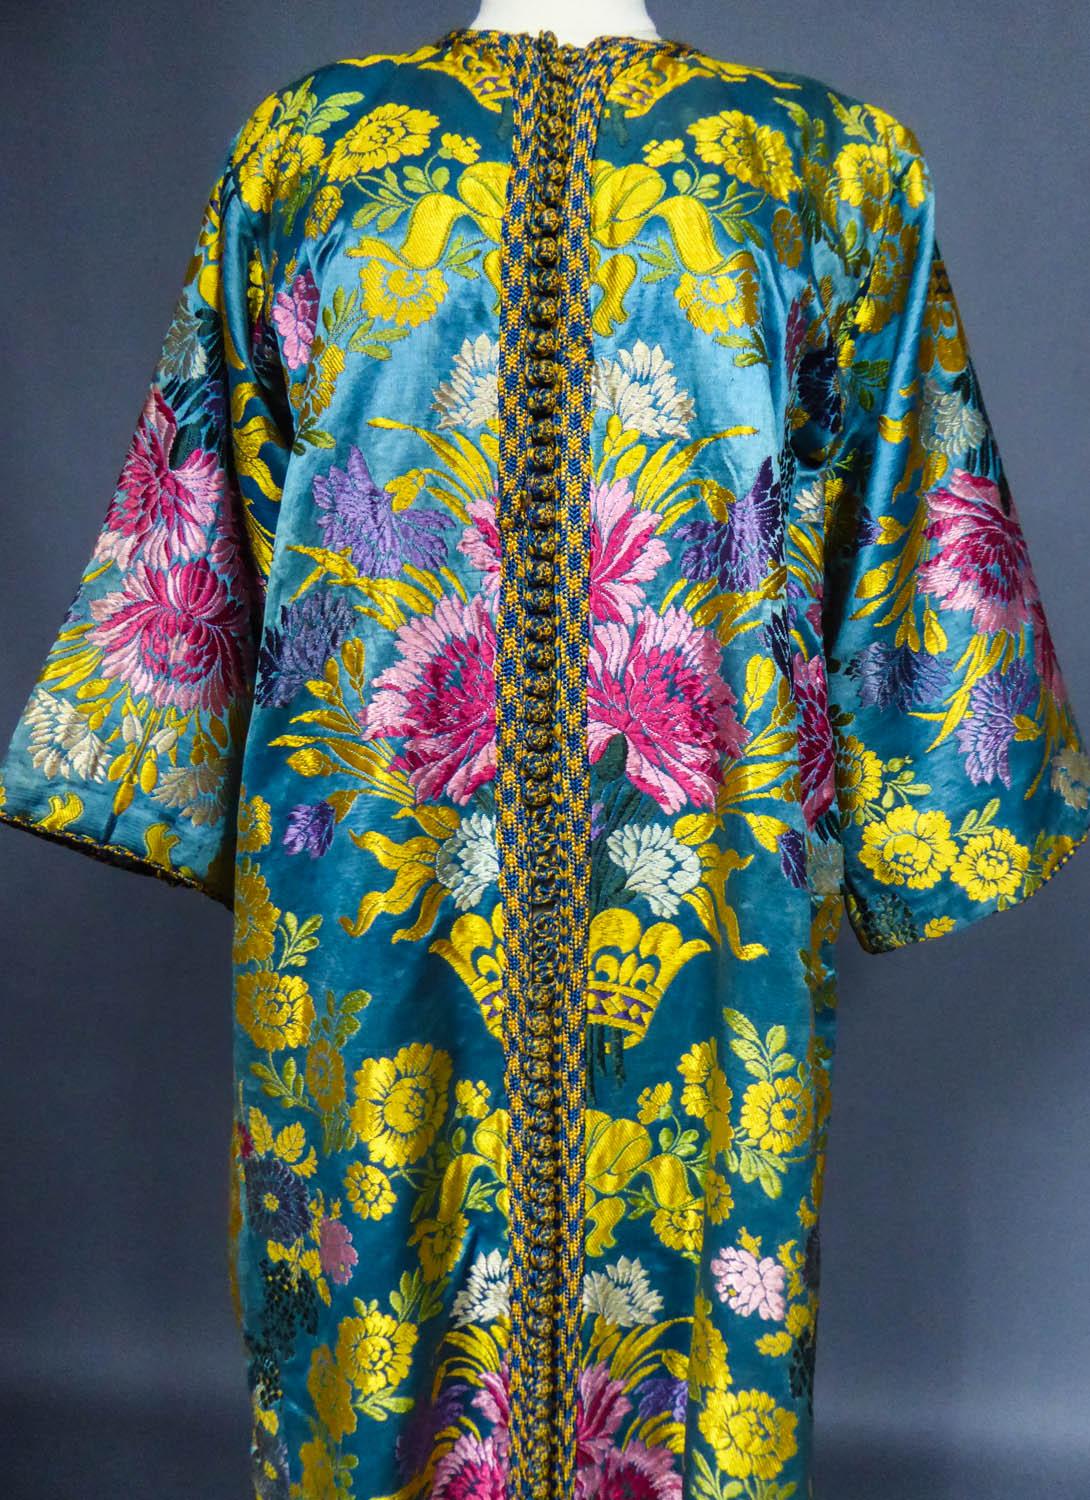 Circa 1900
Morocco or Middle East

Flamboyant Kaftan or formal coat in brocaded silk from the late 19th century. Rich decor with large floral bouquets fuchsia, pink, purple, sky-blue and green on blue satin of France. Buttong in front with yellow